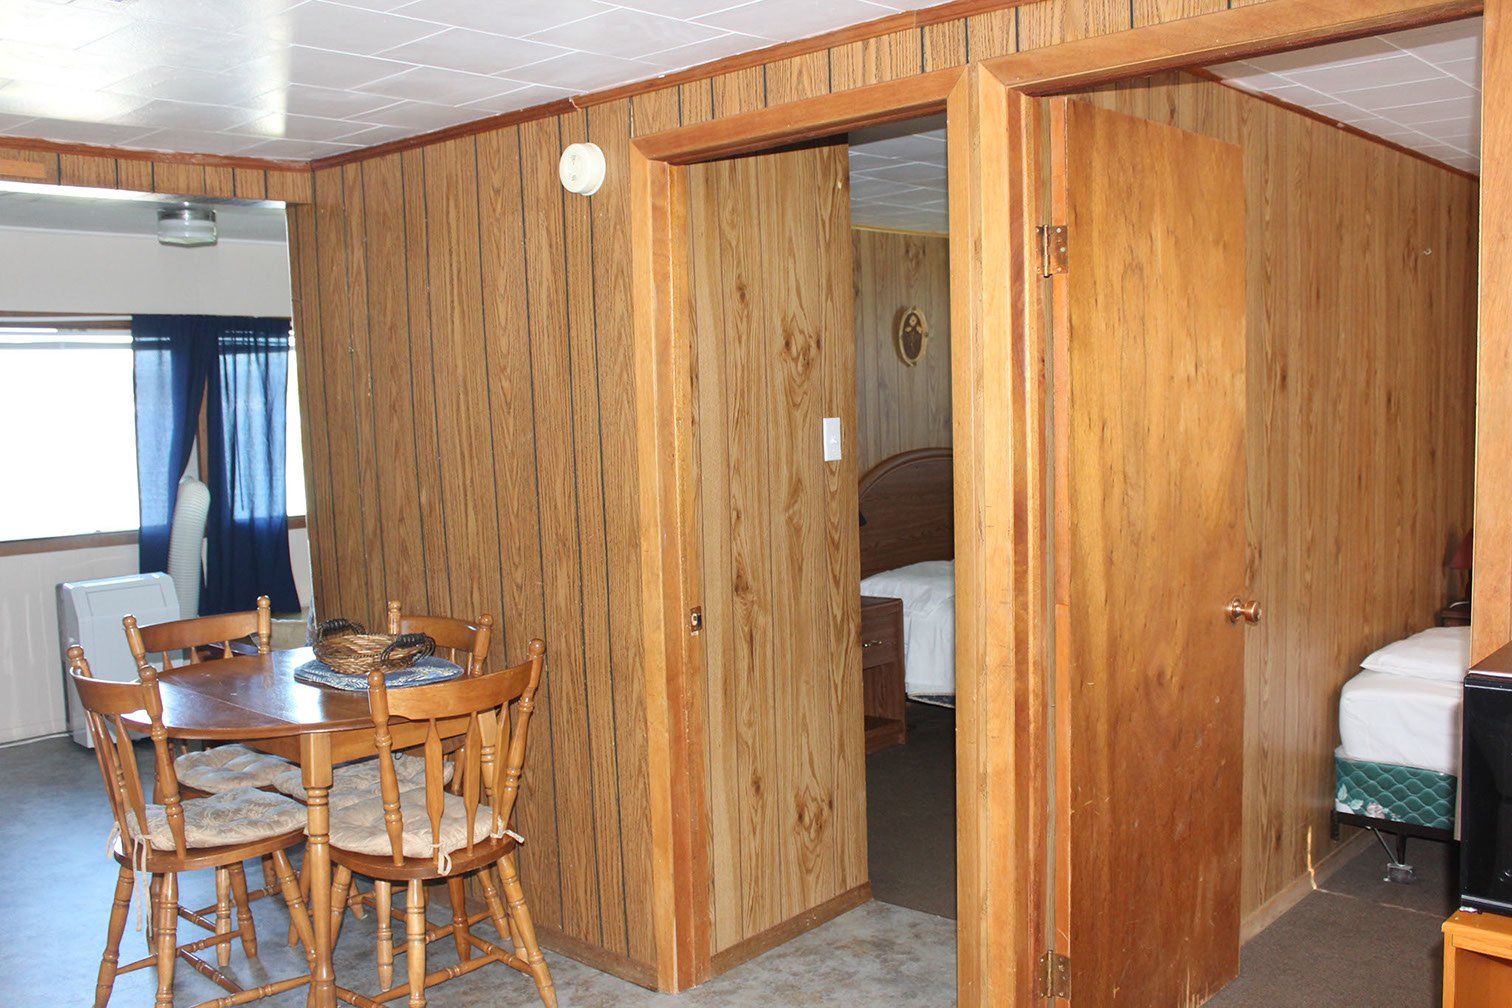 A room with wood paneling and a table and chairs